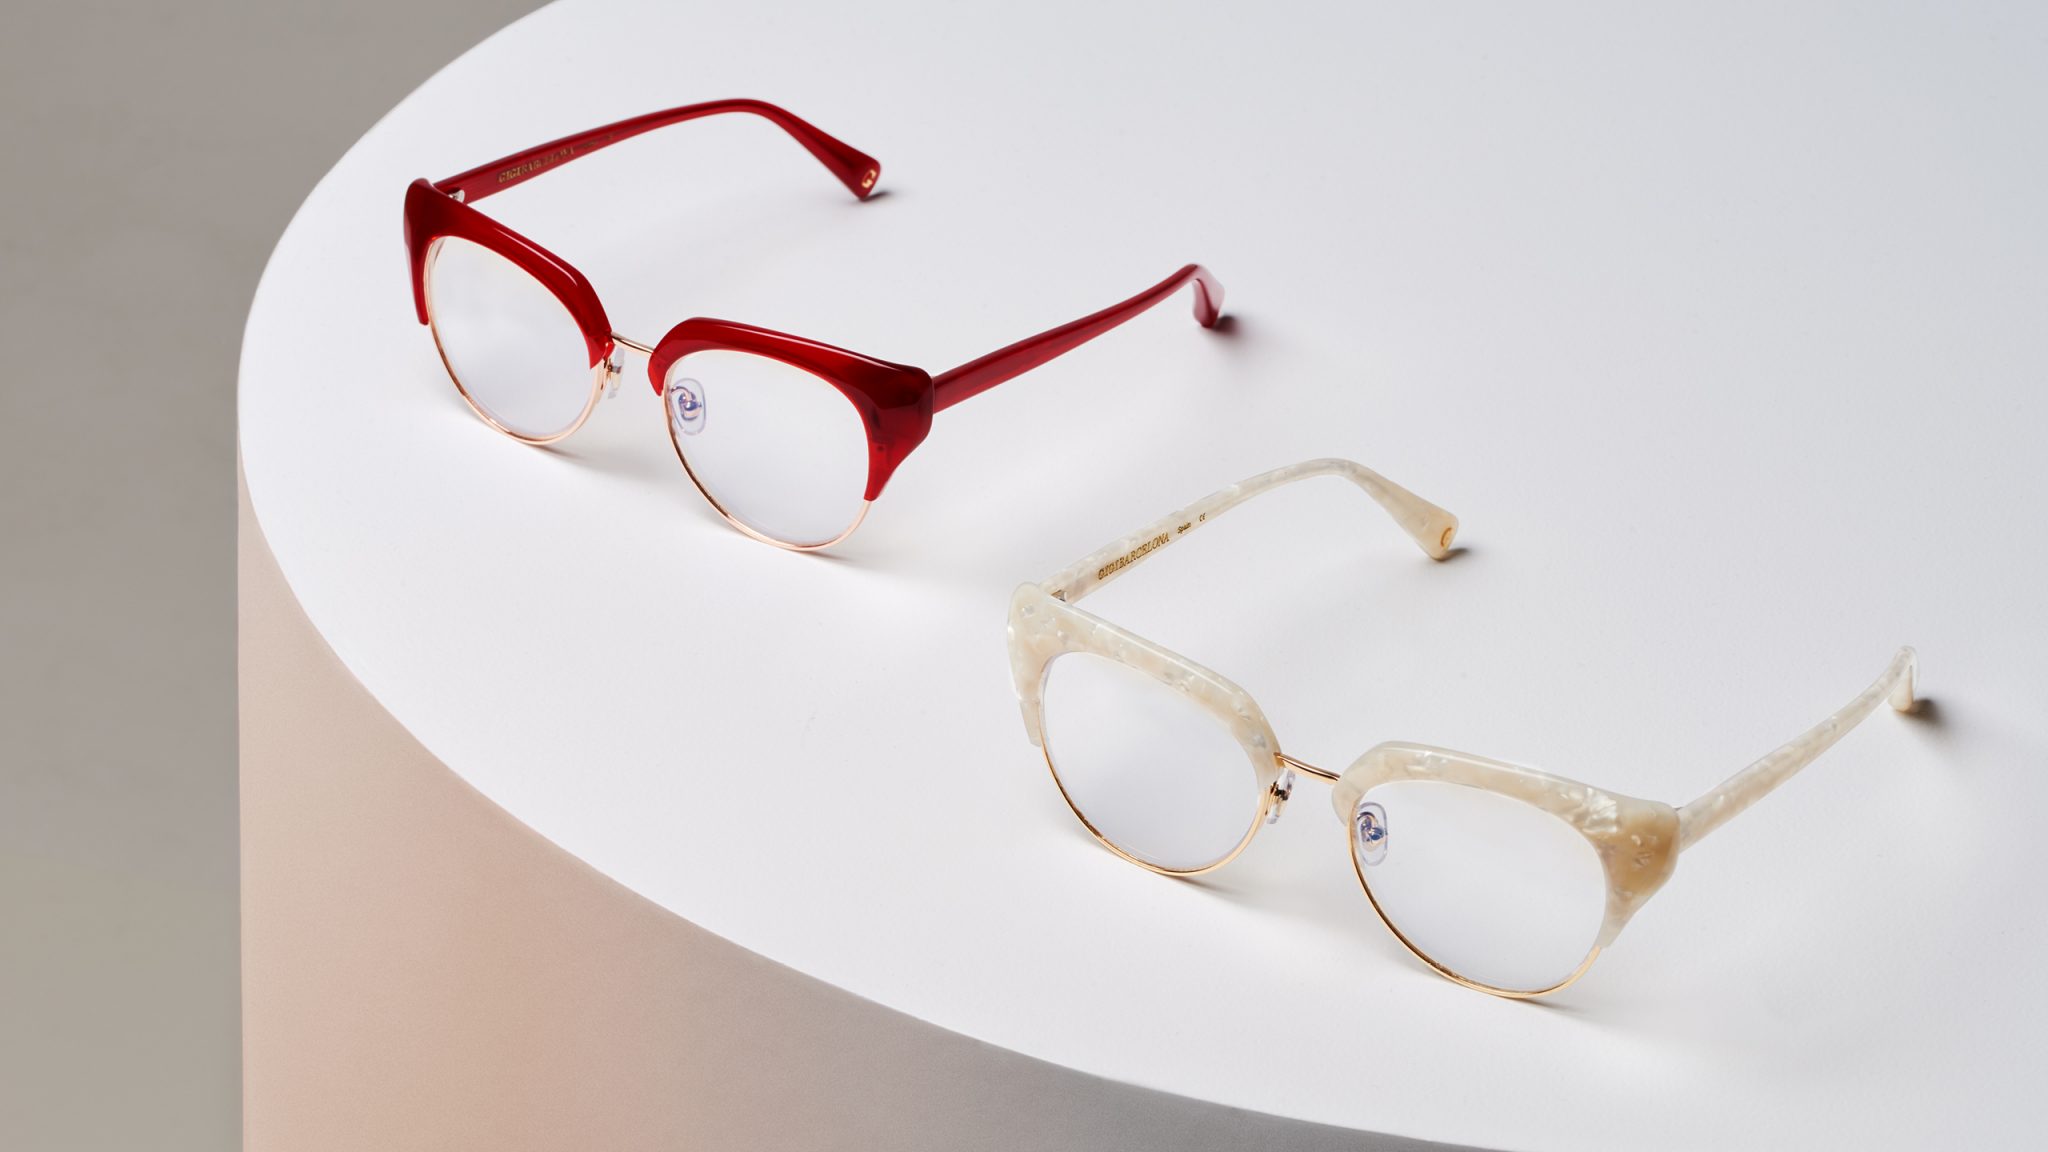 Keeping Traditions Alive with Gigi Barcelona's Latest Frames